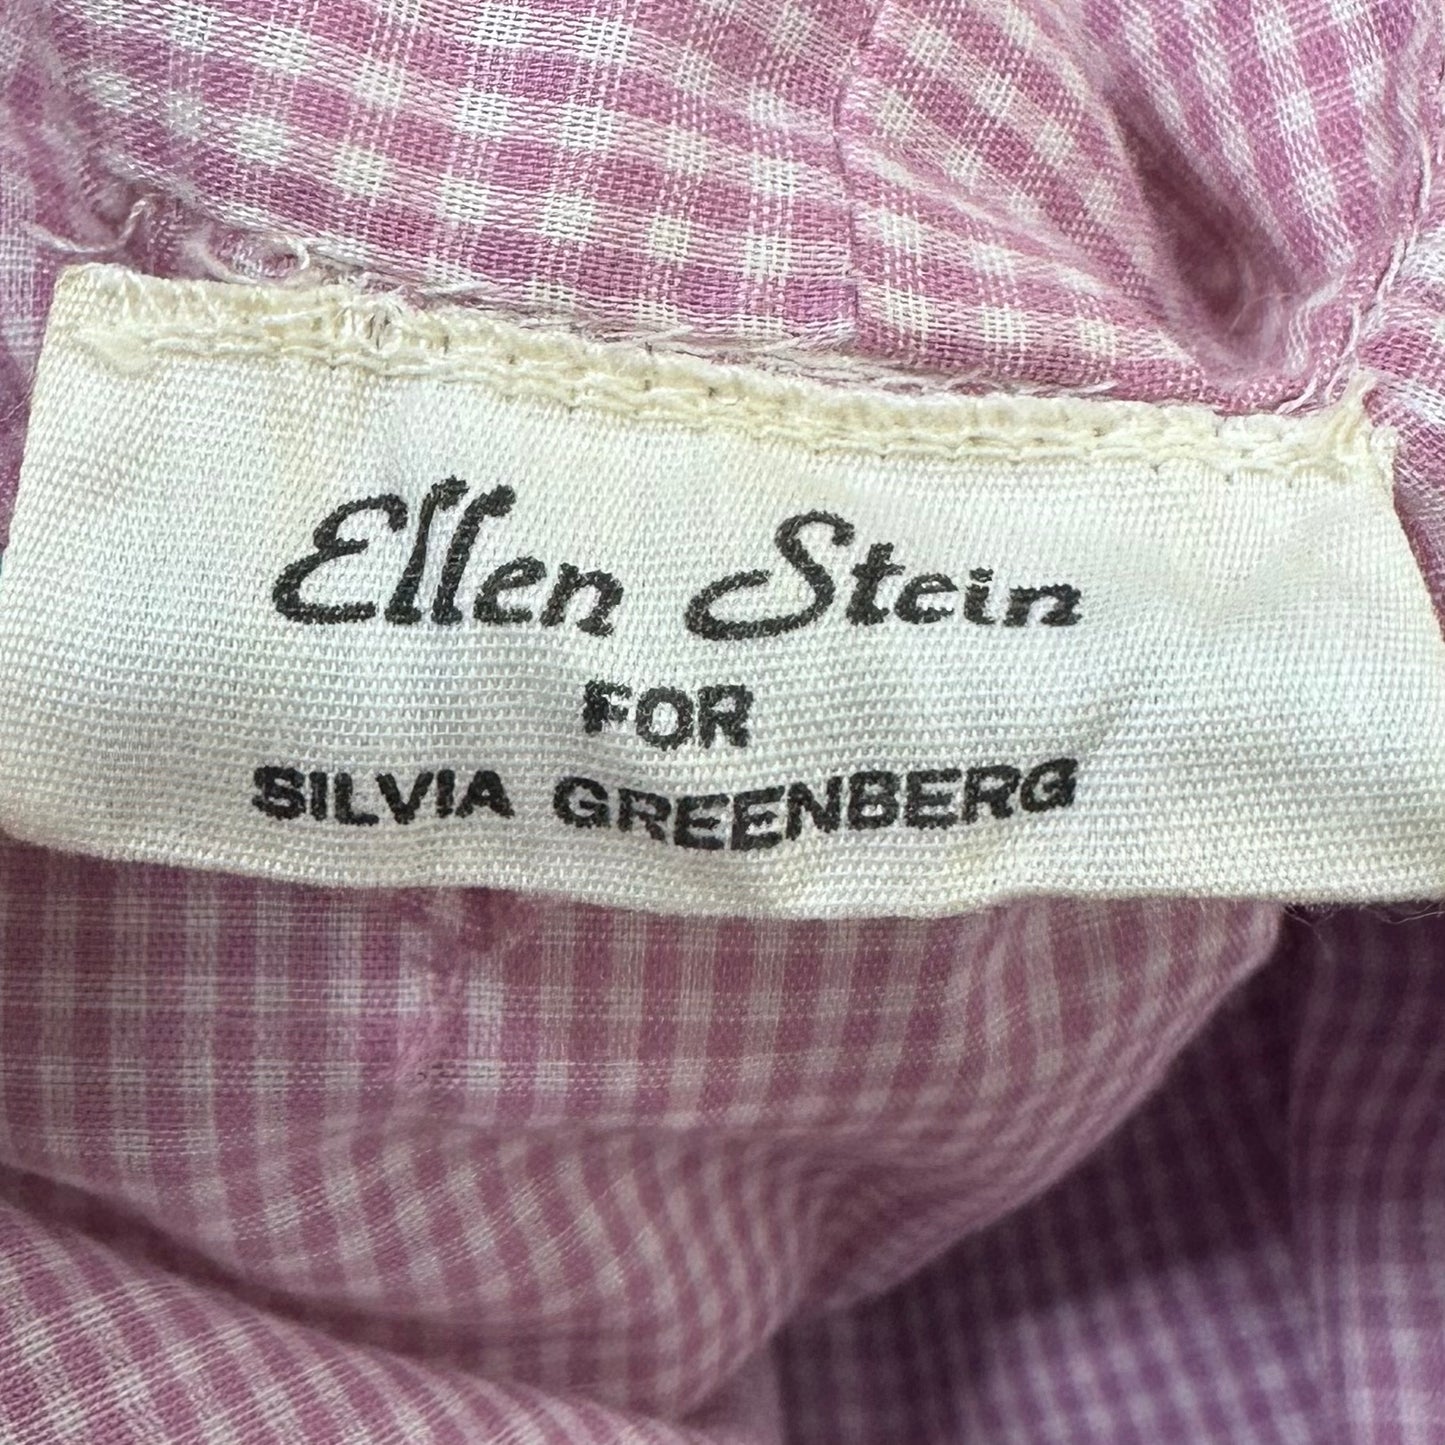 1970s/80s Purple Gingham Bed Jacket, Ellen Stein for Silvia Greenberg Size S/M, Floral Embroidery